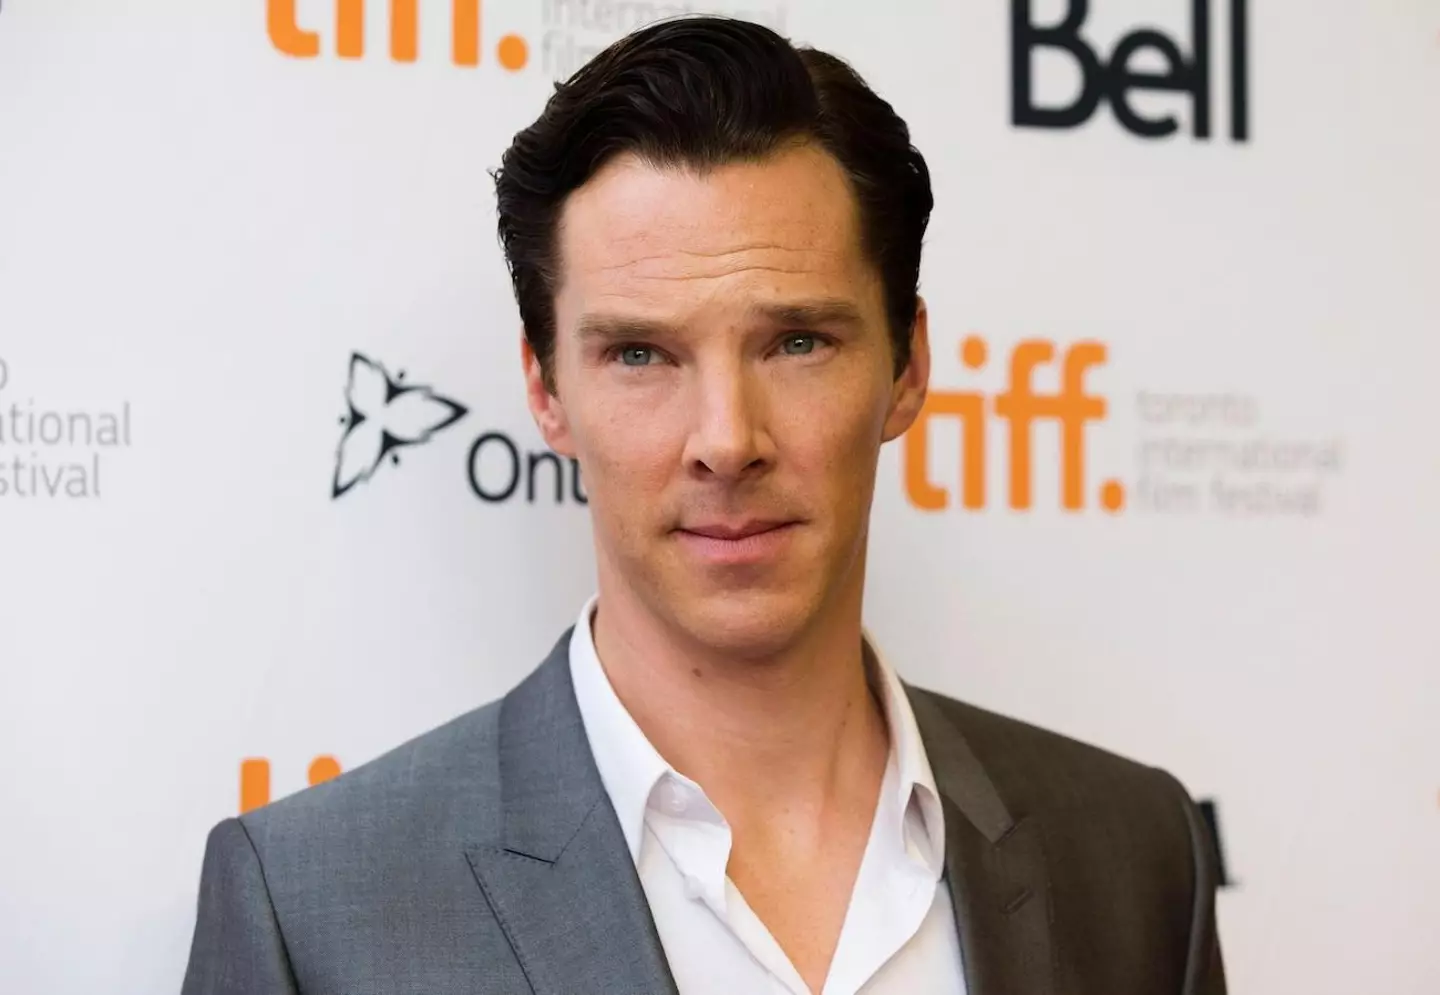 The family of Benedict Cumberbatch's is reportedly facing reparation payments due to slave-owning ancestors.